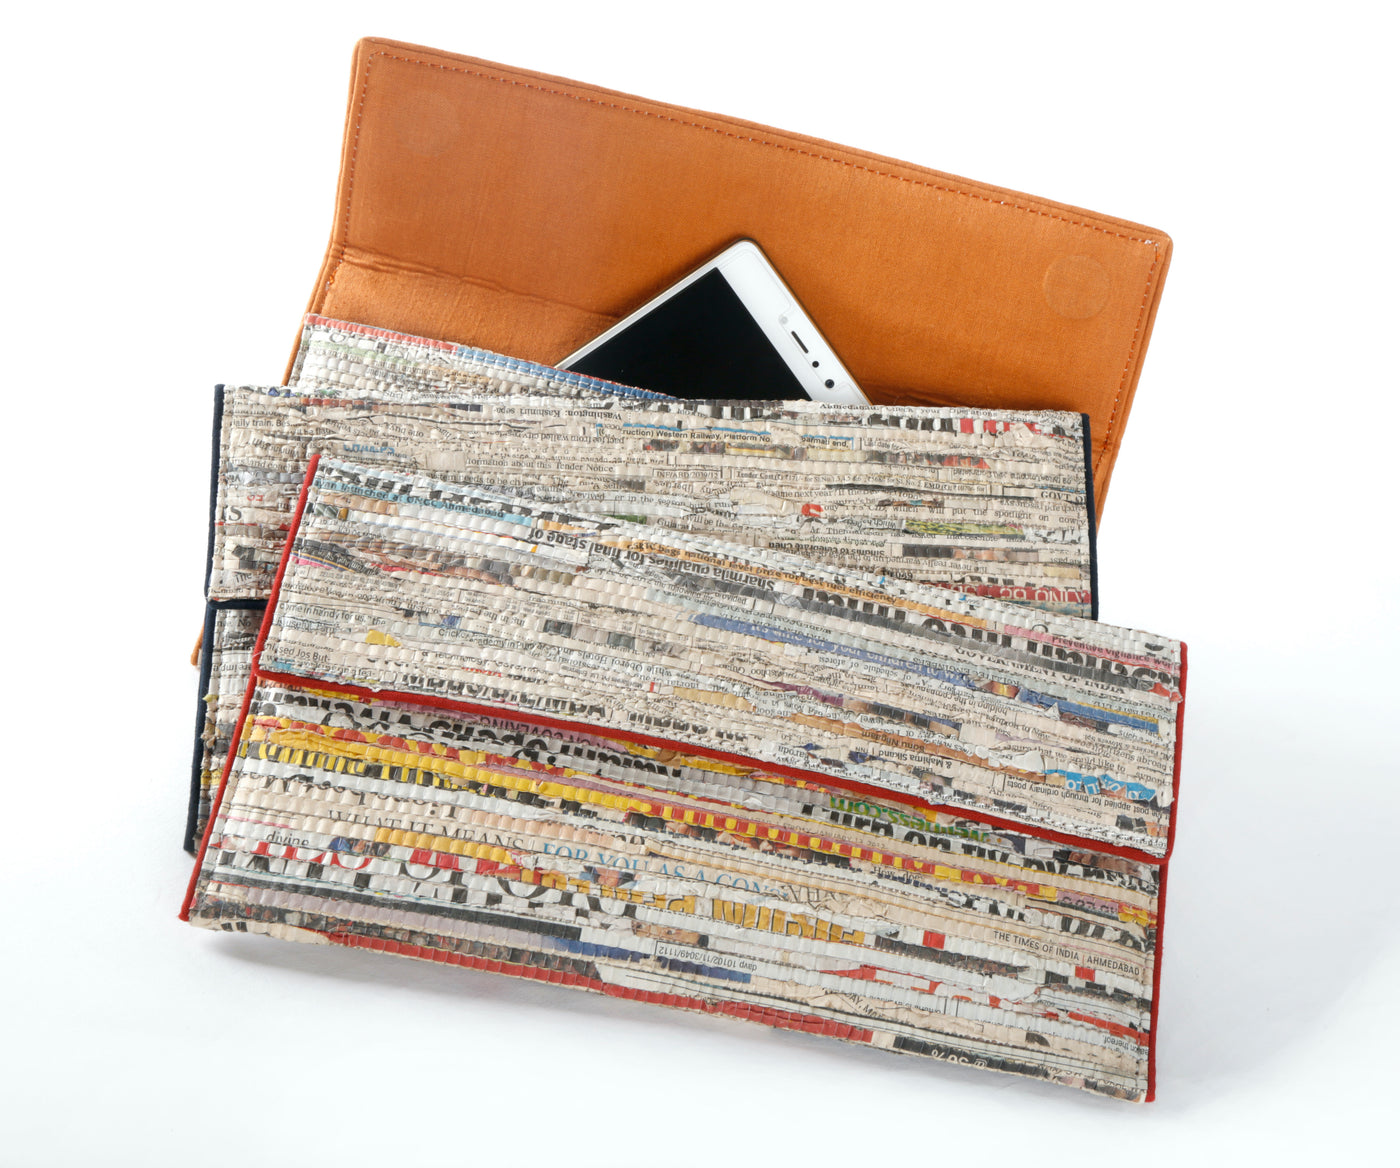 Handmade, functional wristlet made from cotton and newspaper strip comes with burnt maroon lining